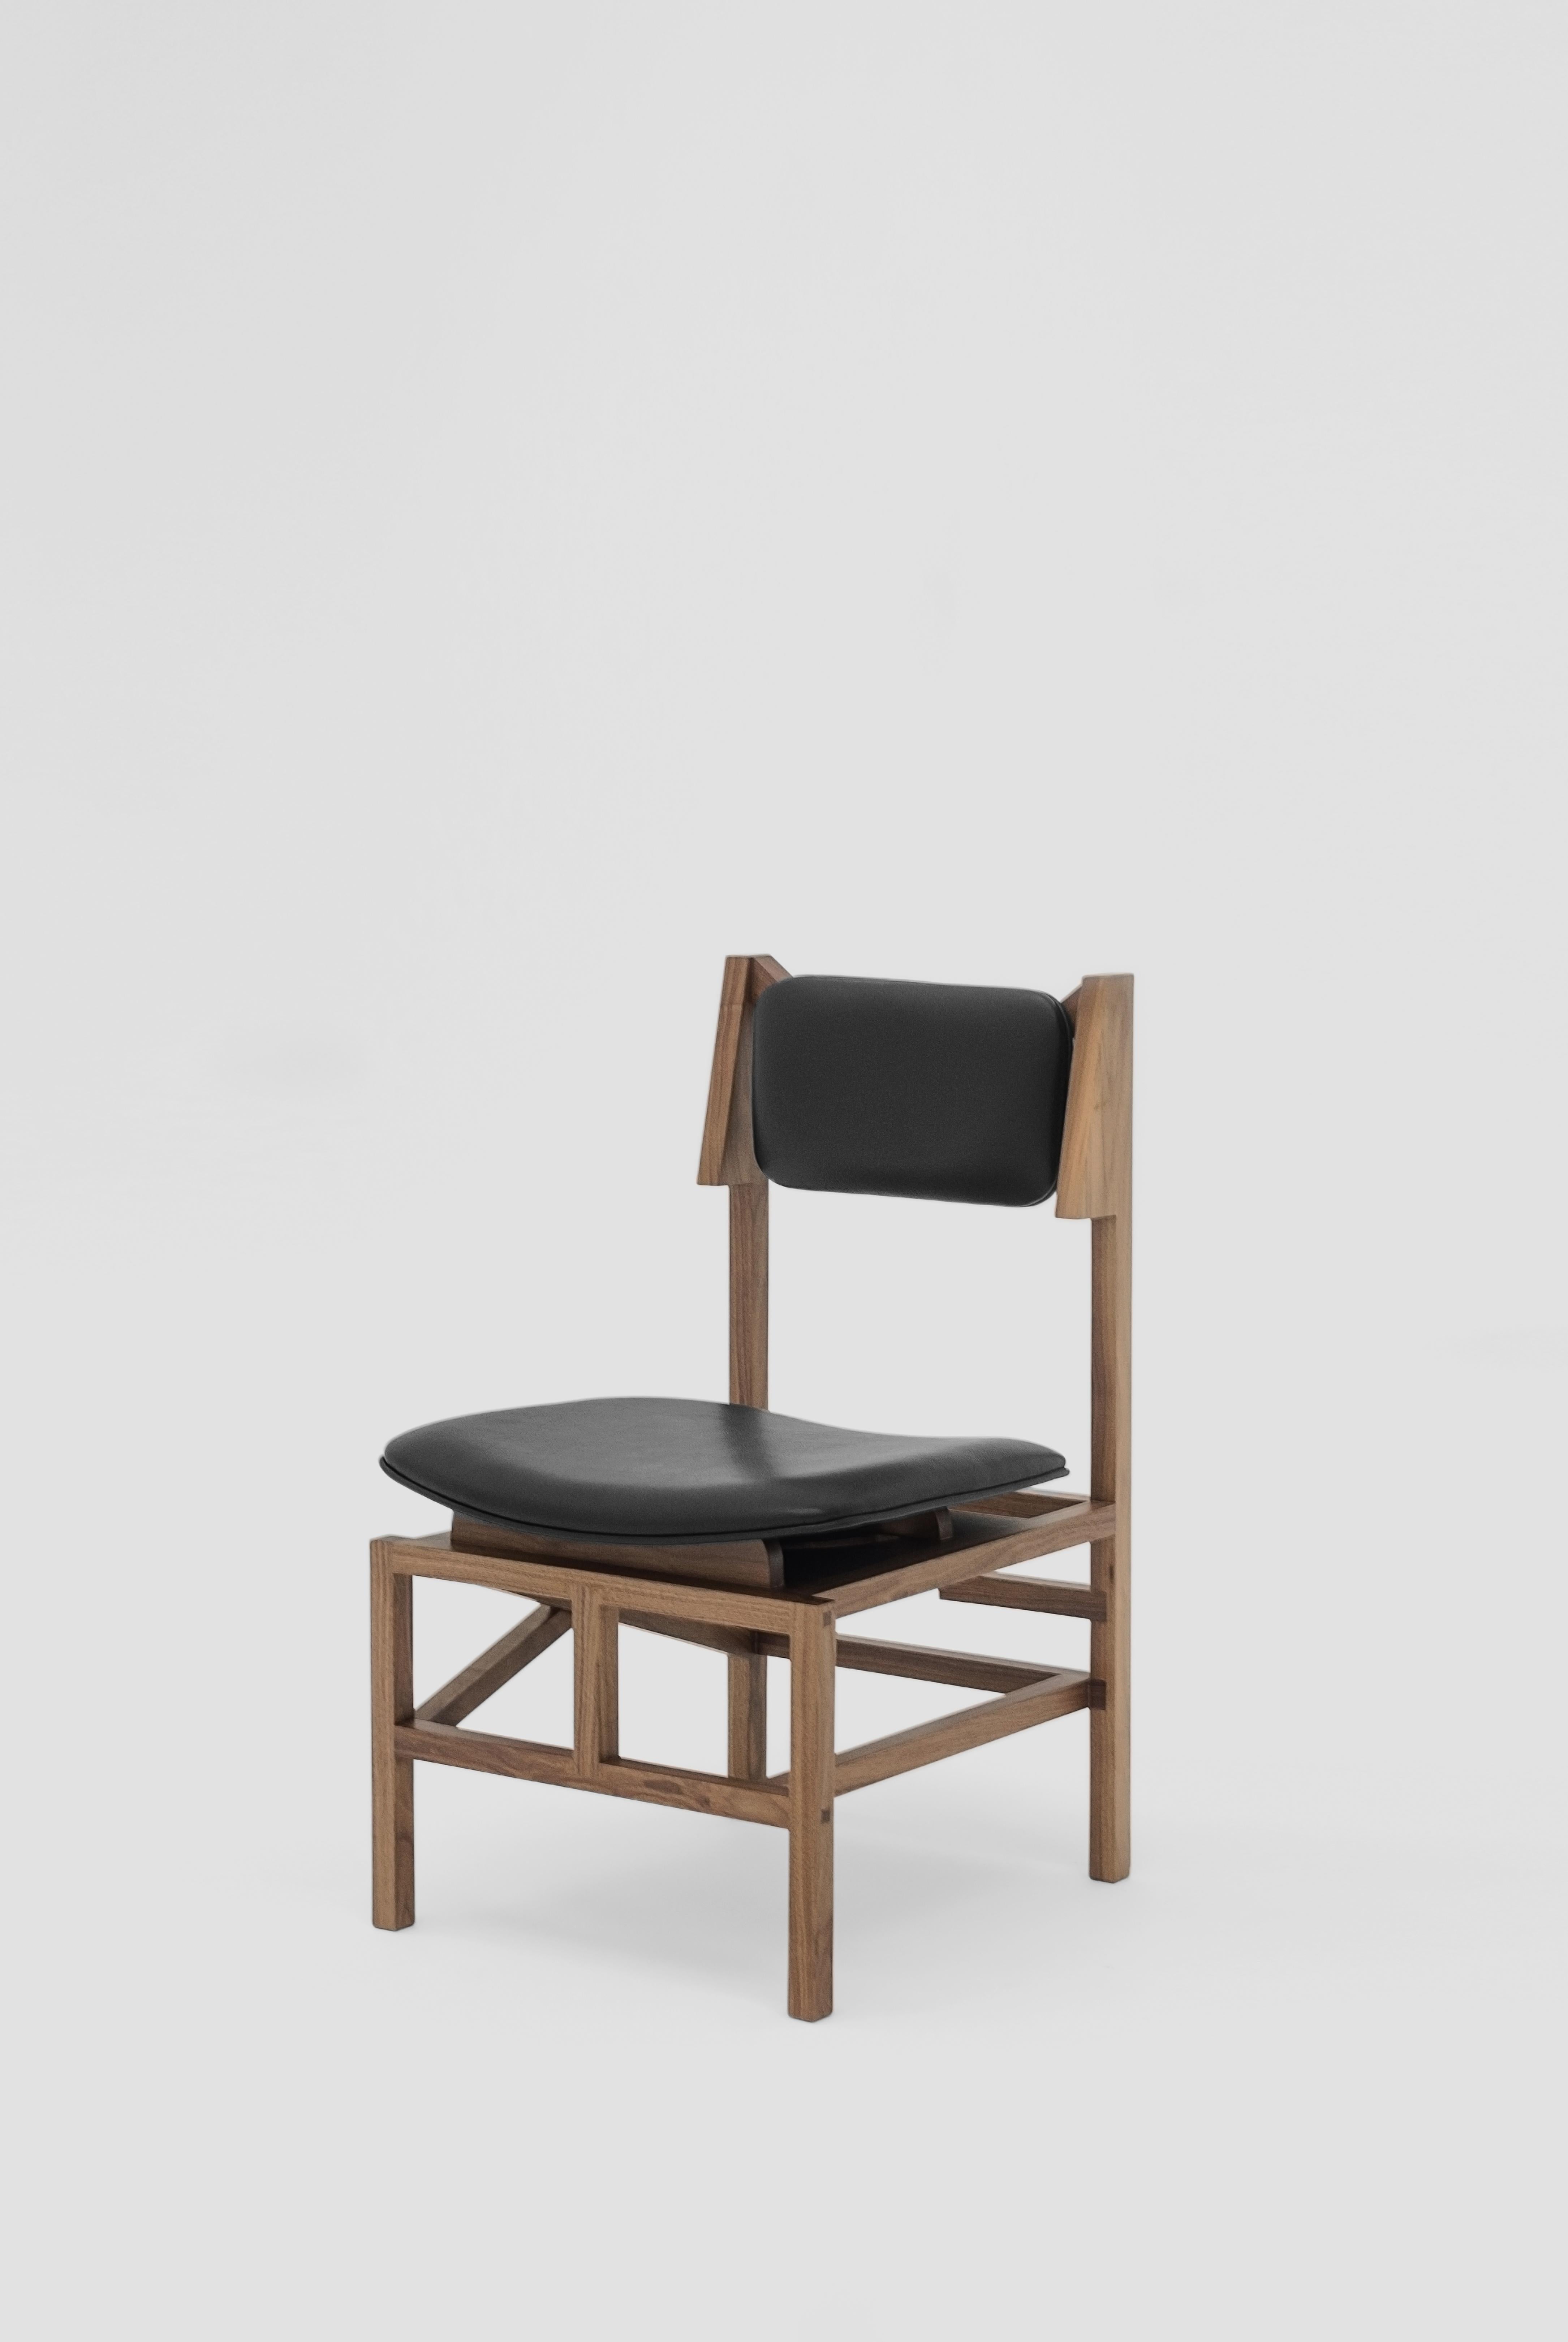 Mexico chair by Marco Rountree
Dimensions: D 53 x W 57 x H 92 cm
Materials: walnut wood, leather.

Chair made of walnut and leather.

Marco Rountree
He defines his practice as the free experimentation of drawing in any material. Through